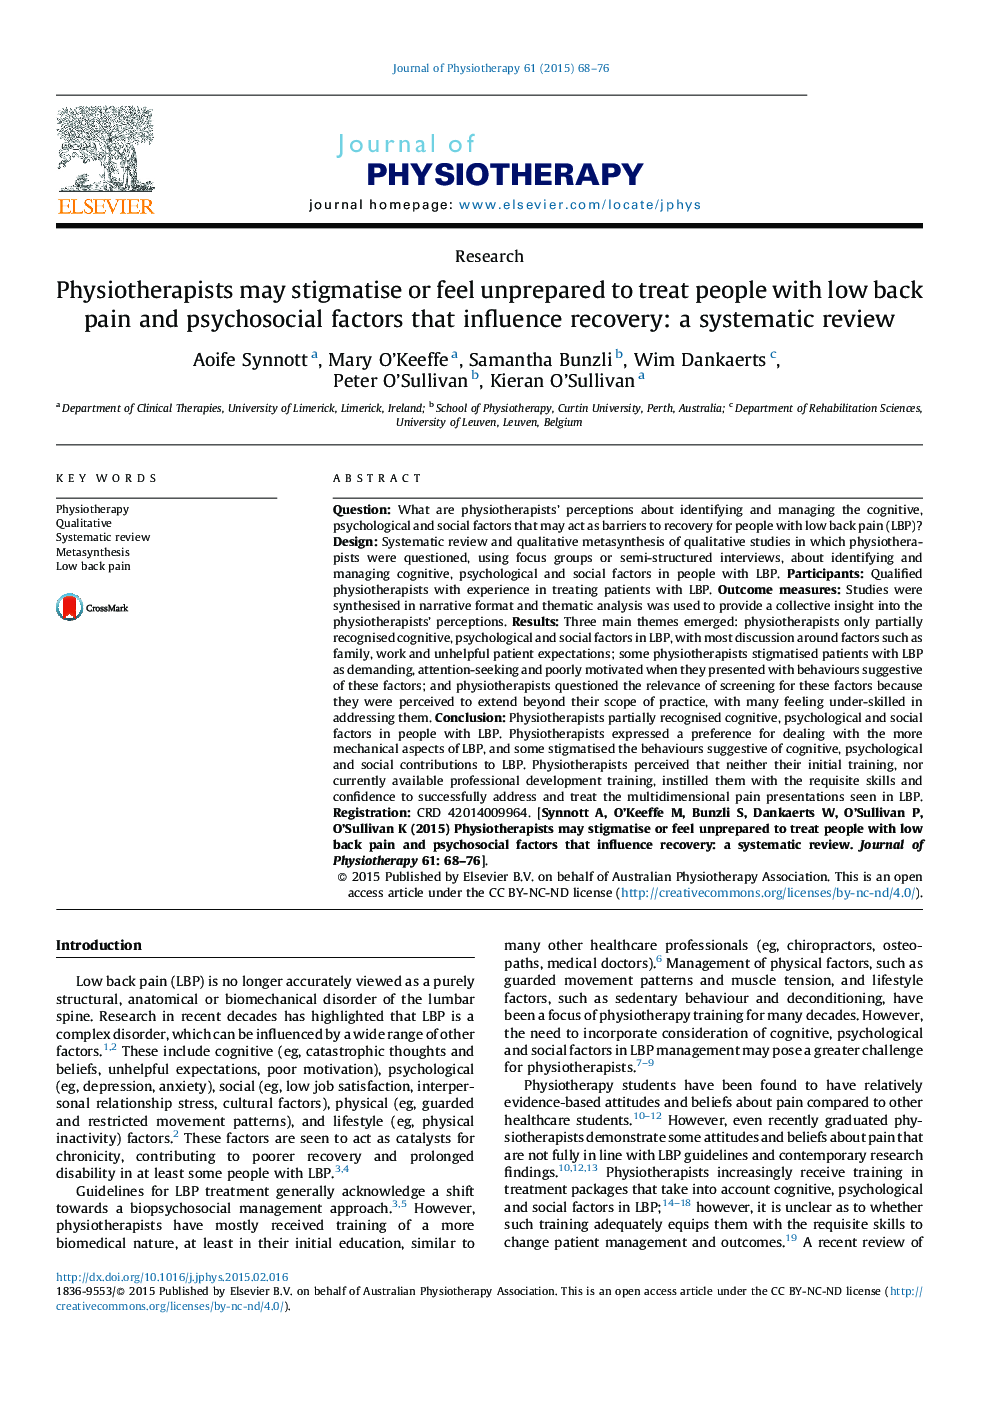 Physiotherapists may stigmatise or feel unprepared to treat people with low back pain and psychosocial factors that influence recovery: a systematic review